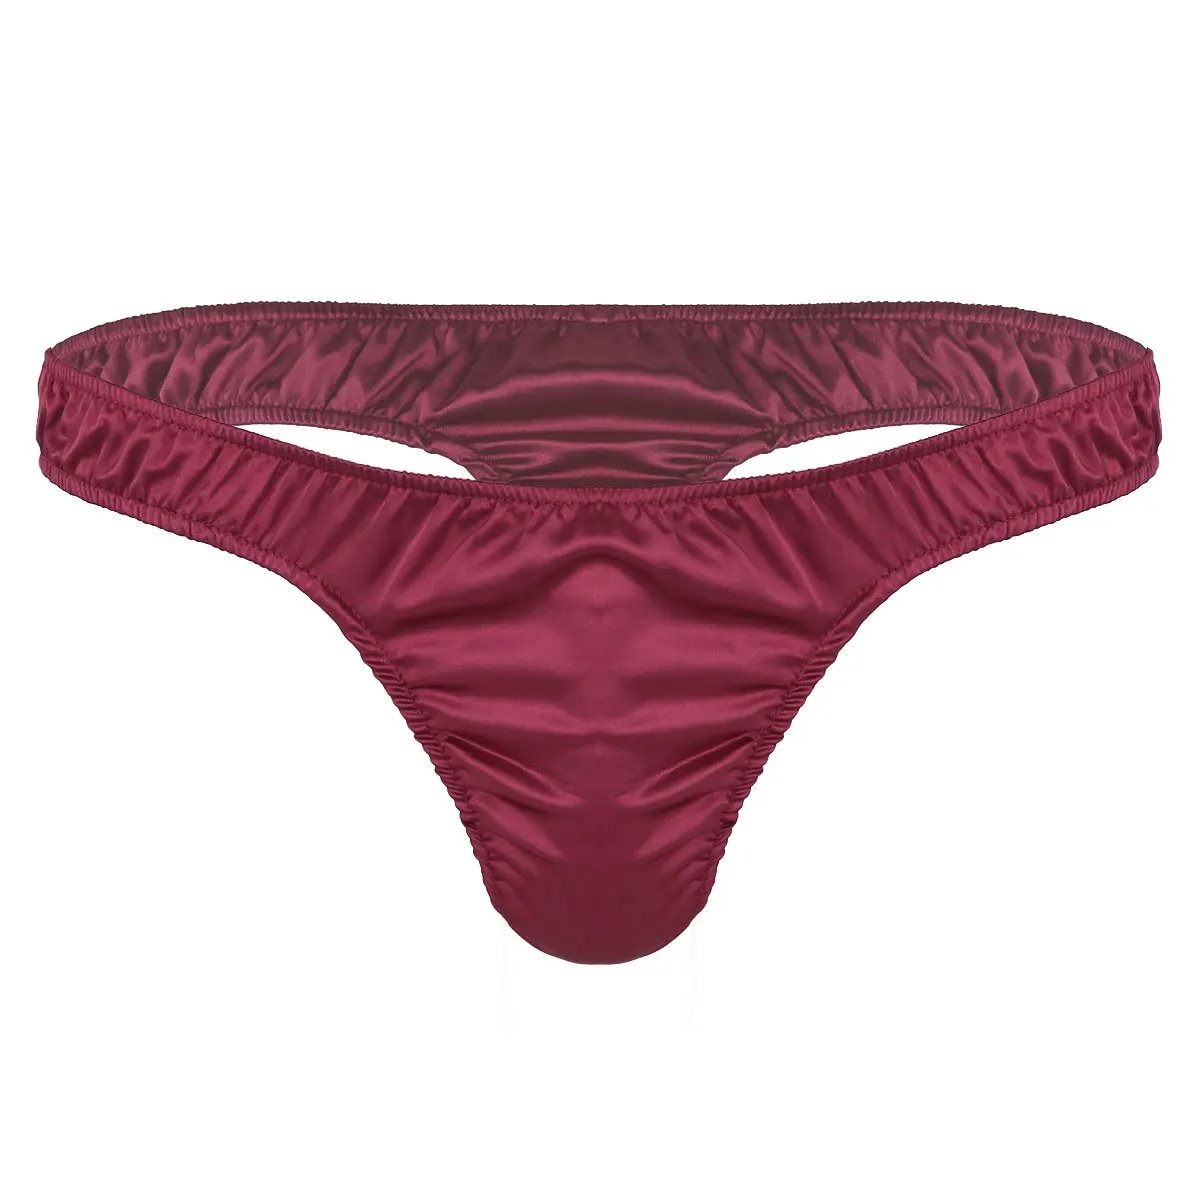 Underwear Mens Bikini G-String And Thong Briefs Gay Underwear Sexy Lingerie Panties Shiny Ruffled Low Rise Male Thong Panties - Color: Wine Red